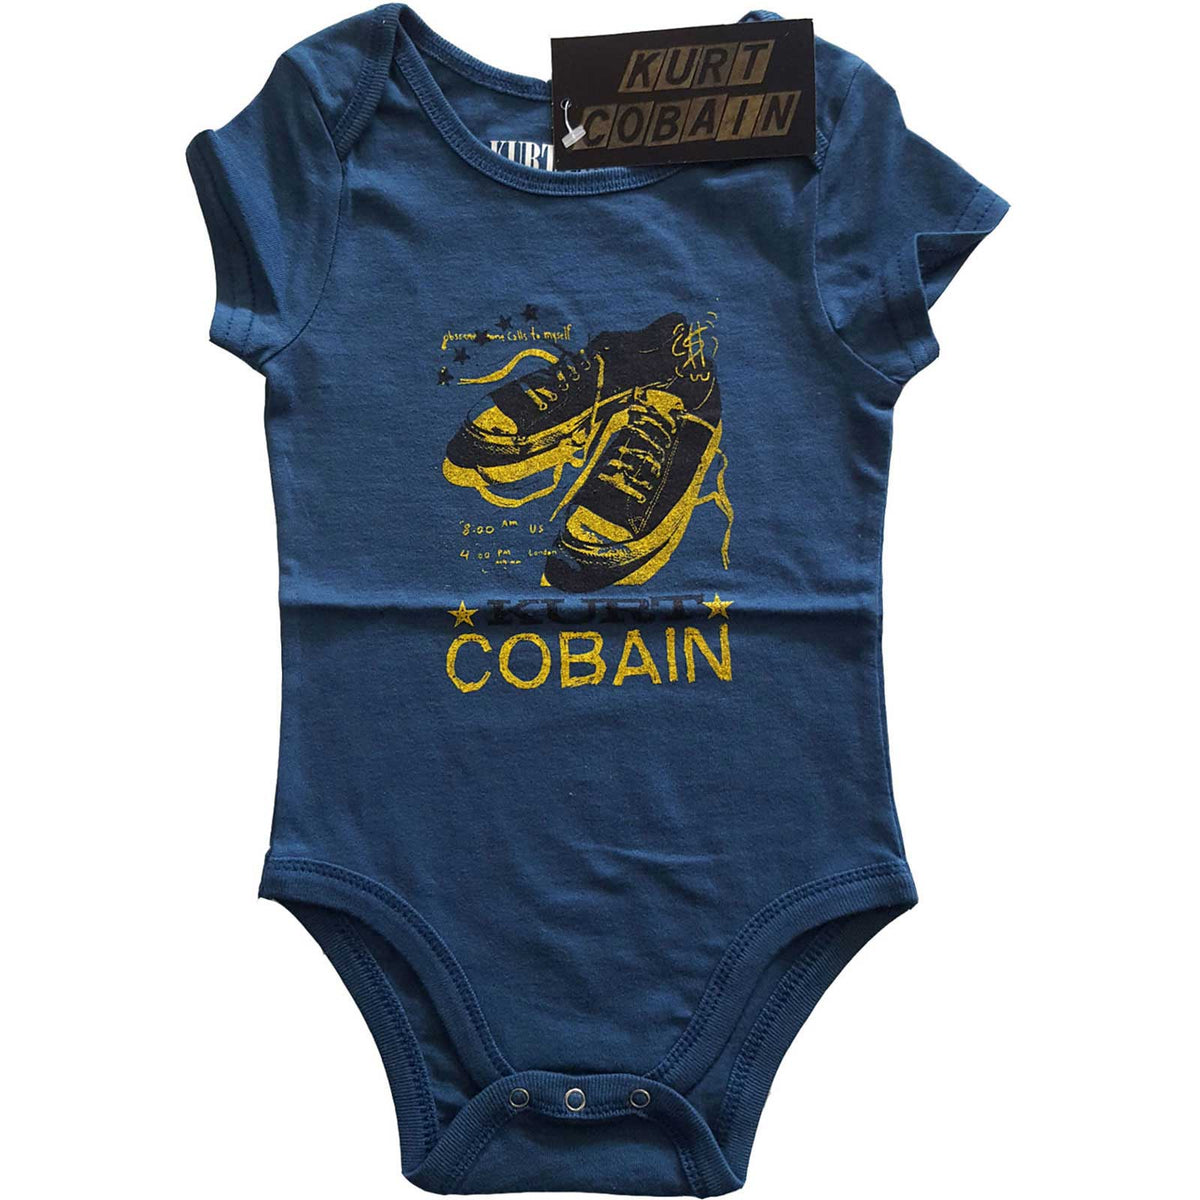 Kurt Cobain Nirvana Baby Grow - Laces - Official Licensed Product